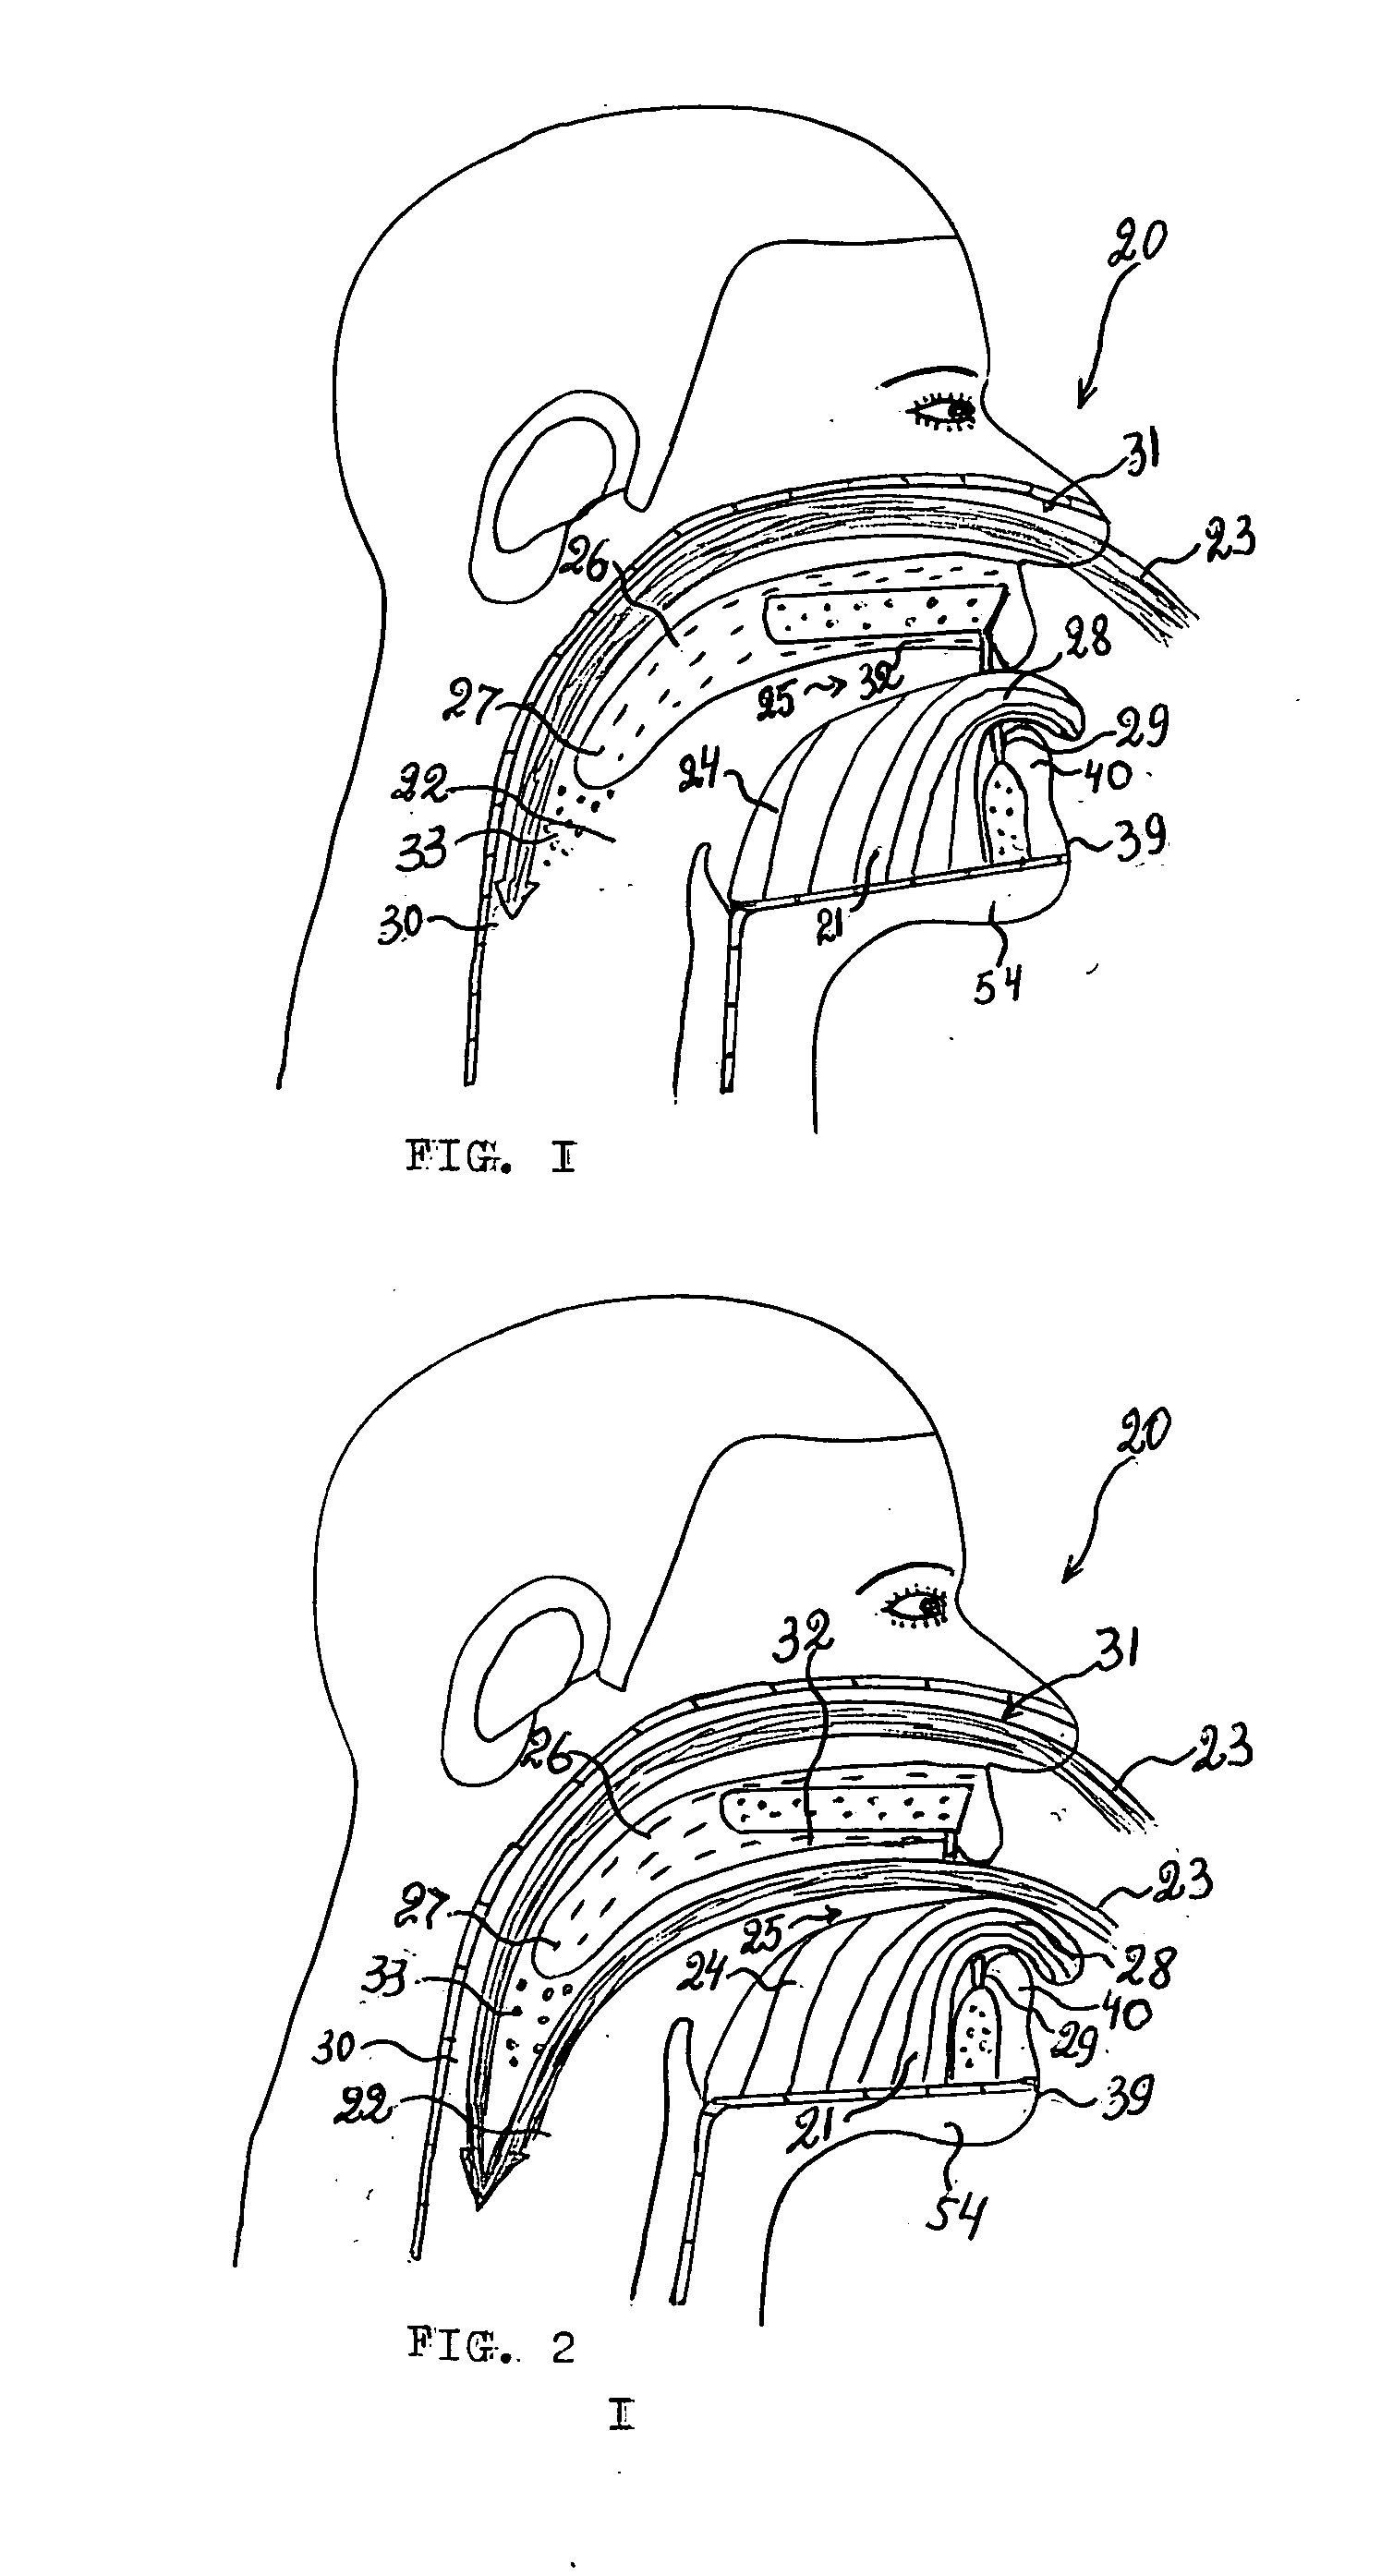 Device for the treatment of snoring and obstructive sleep apnea